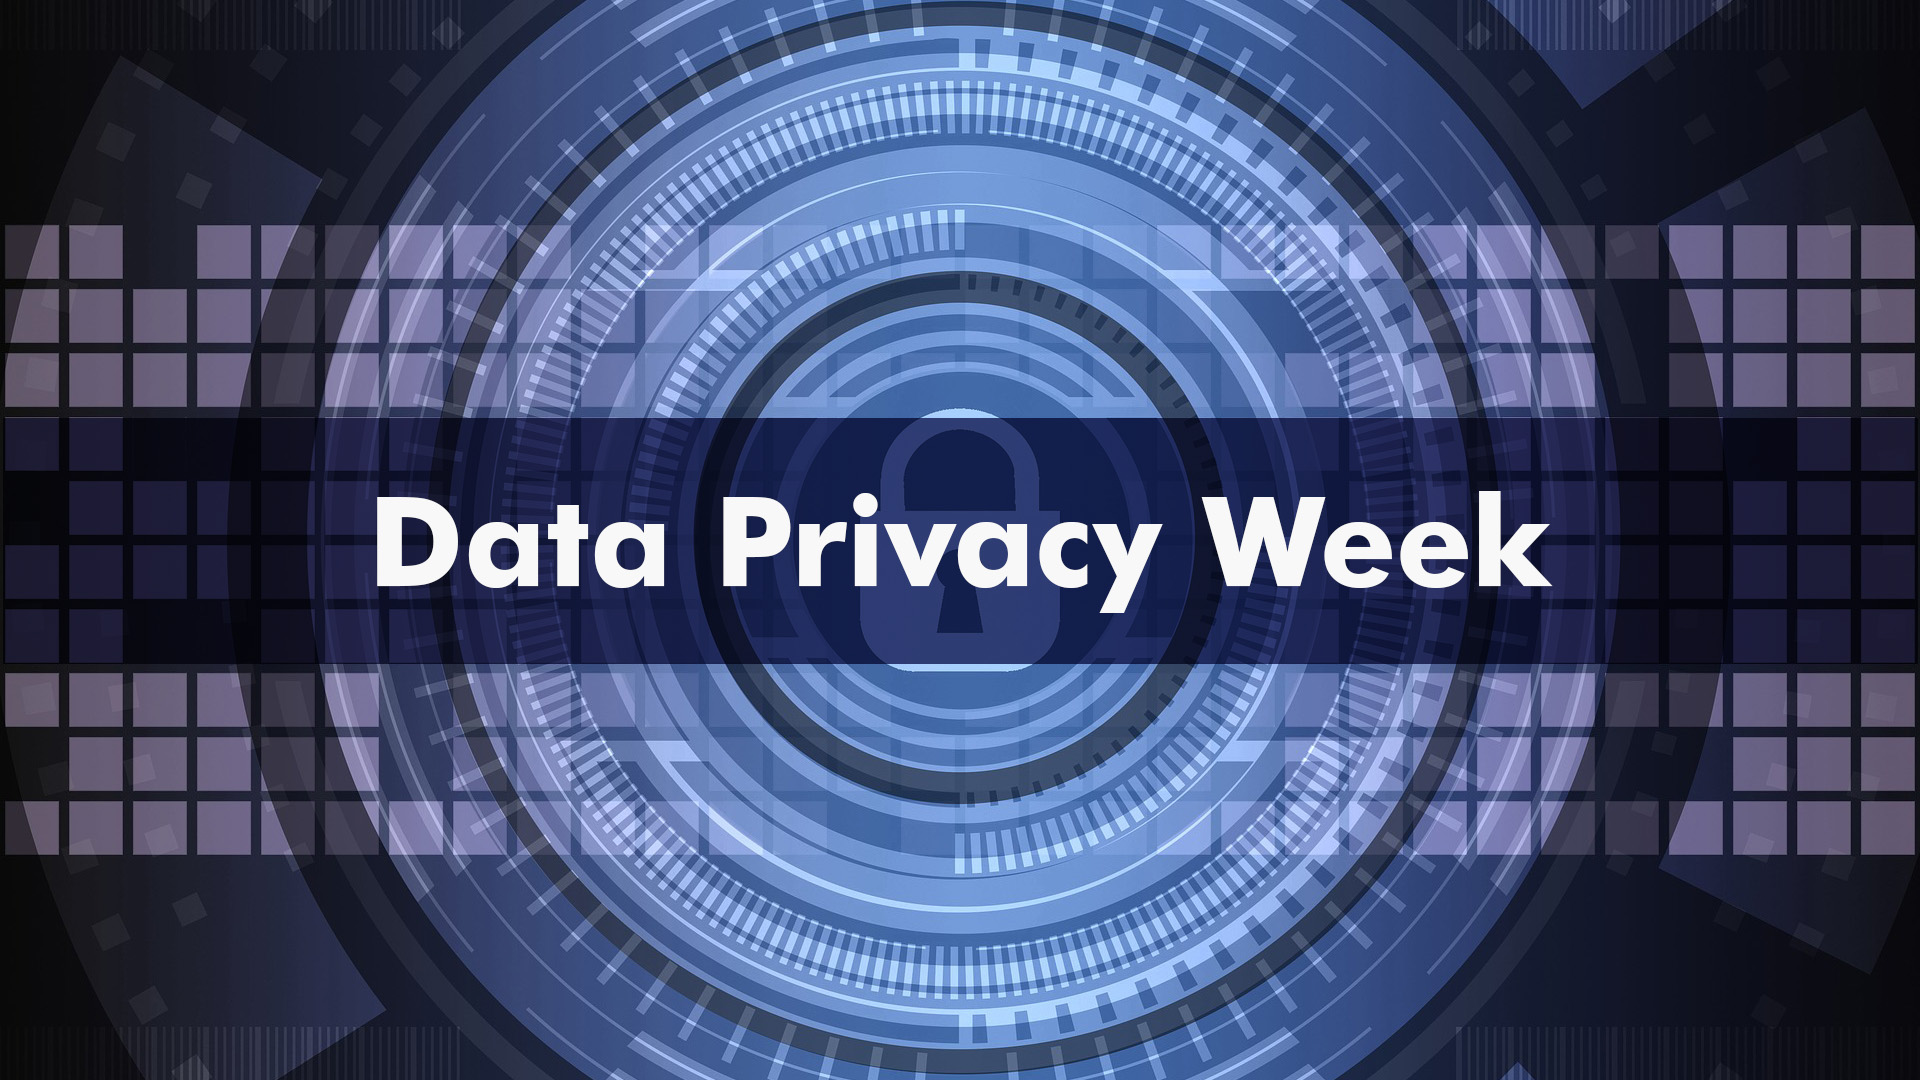 Black and navy blue background with a circular illustration in the center of the screen of grey gears and purple gradients with a lock in the middle. Data Privacy Week is spelt out across the middle of the screen.